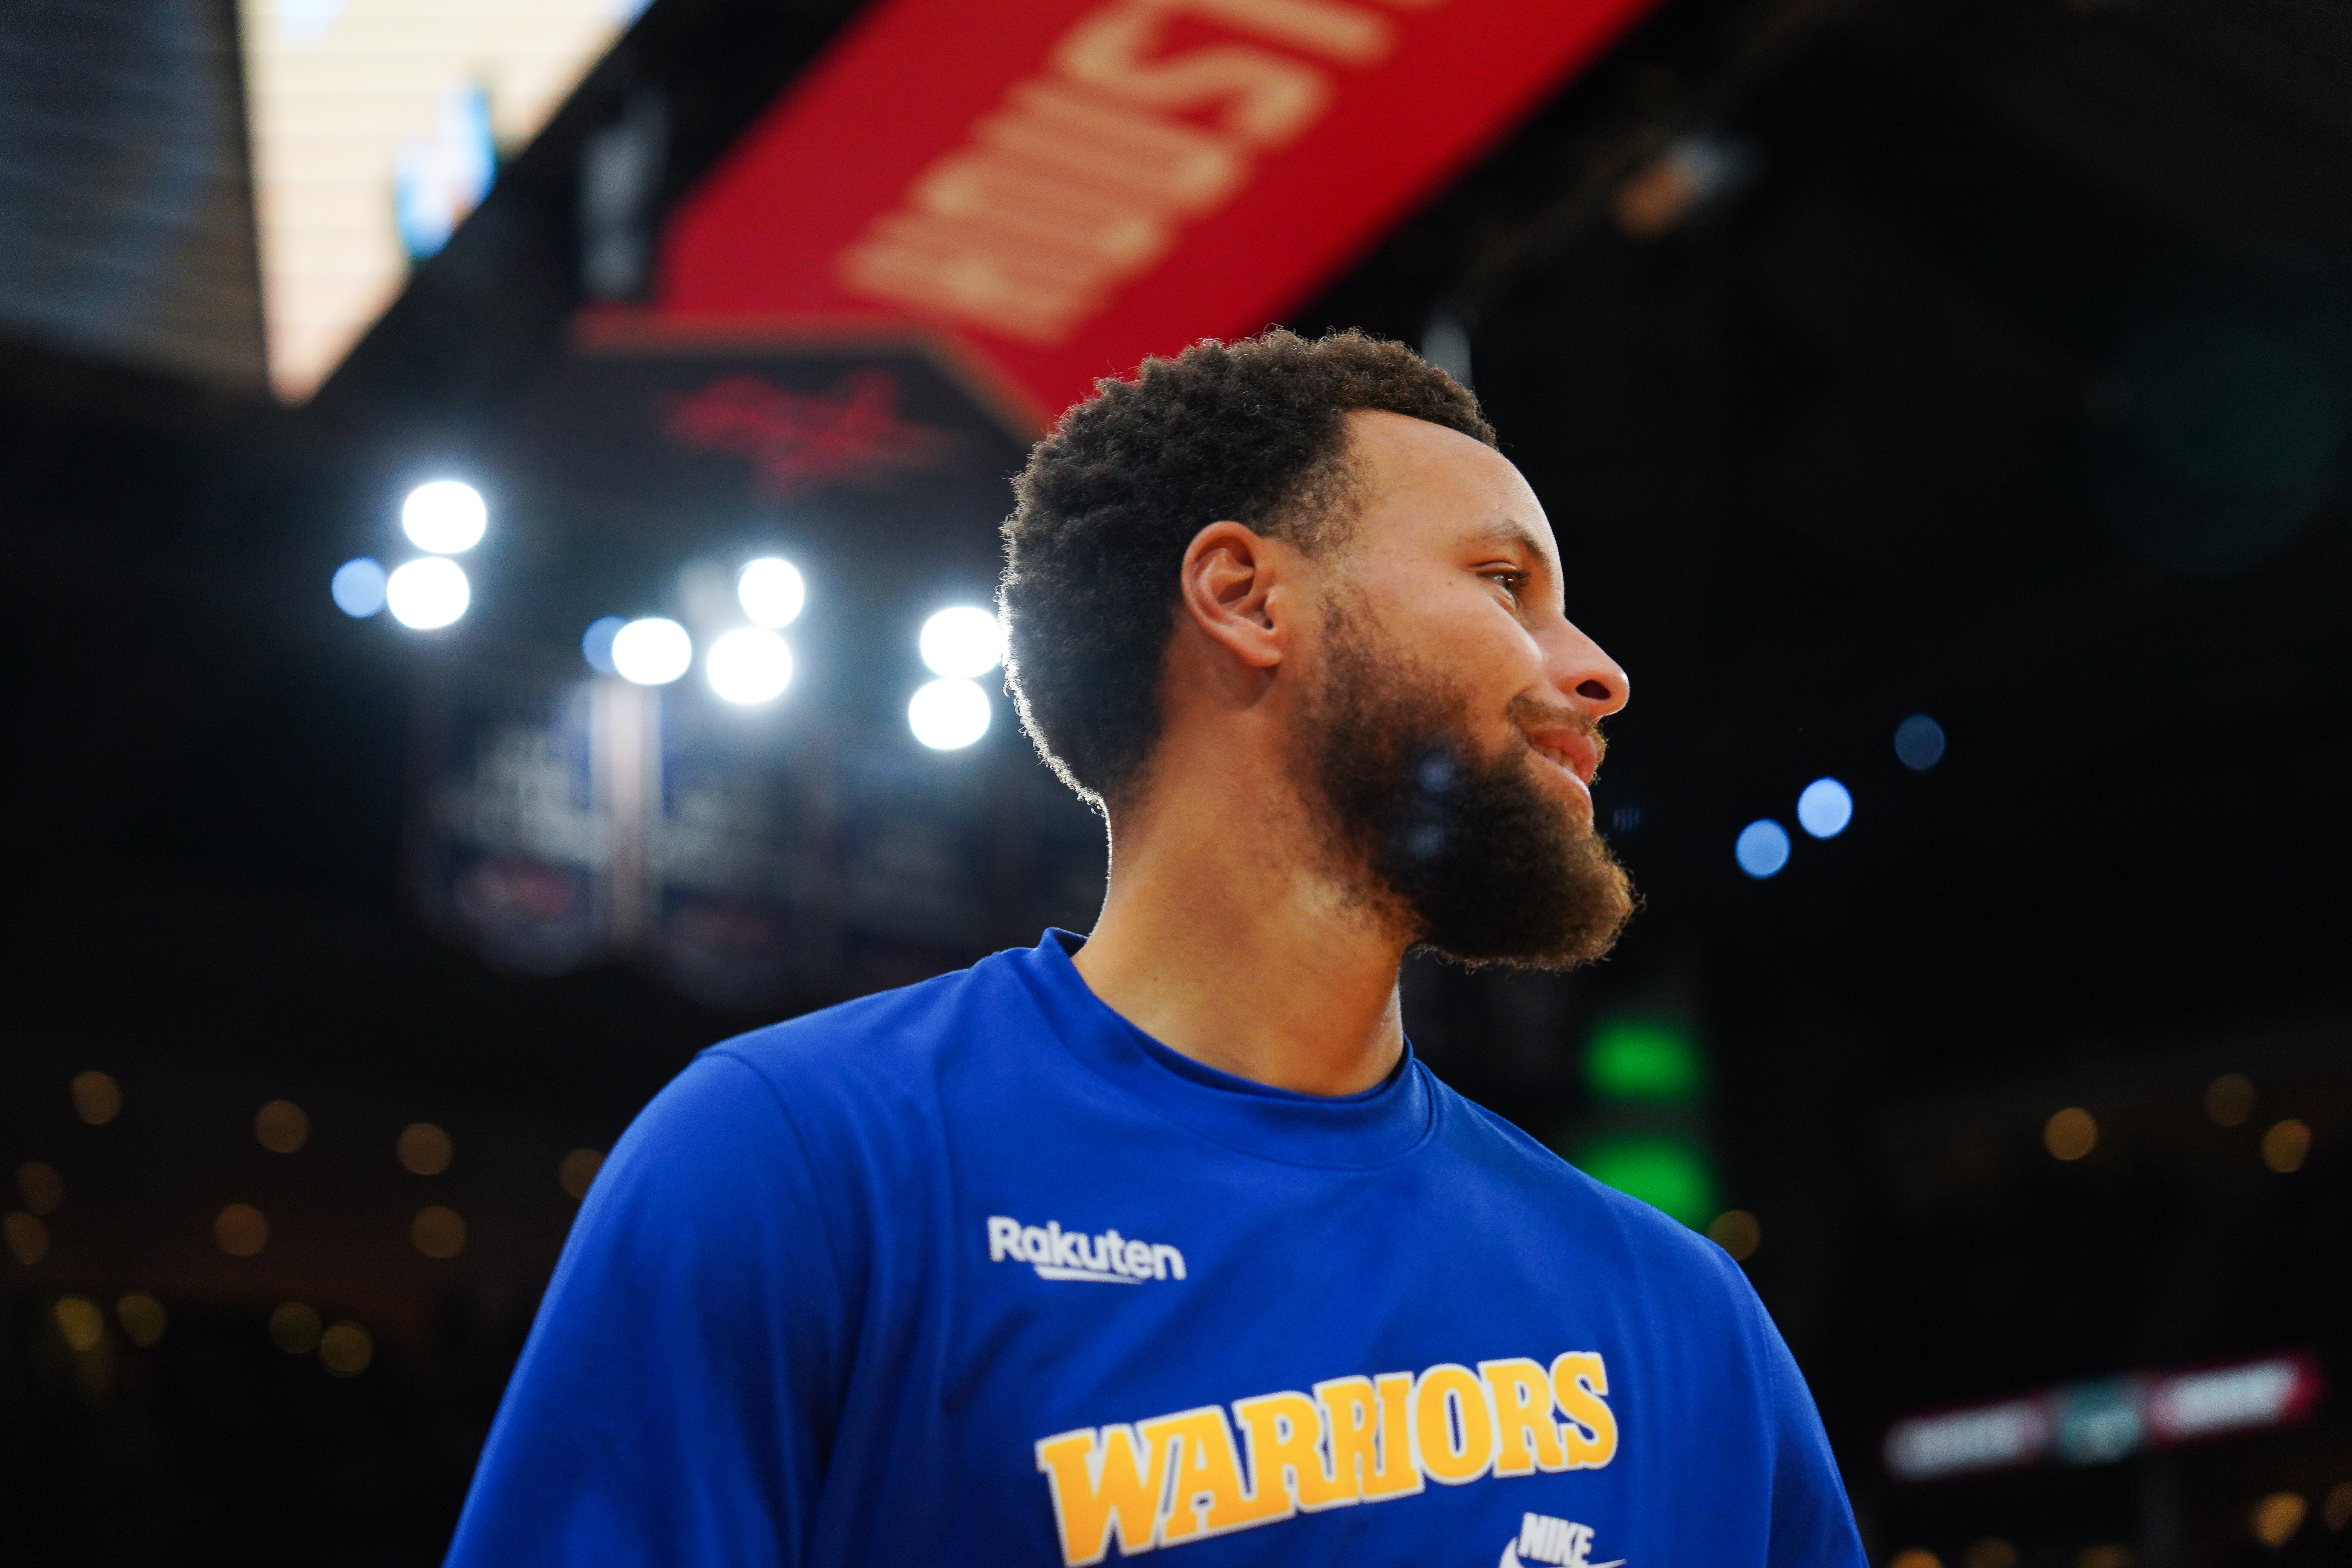 Stephen Curry Says He'd Play For The Hornets If He Wanted To Play